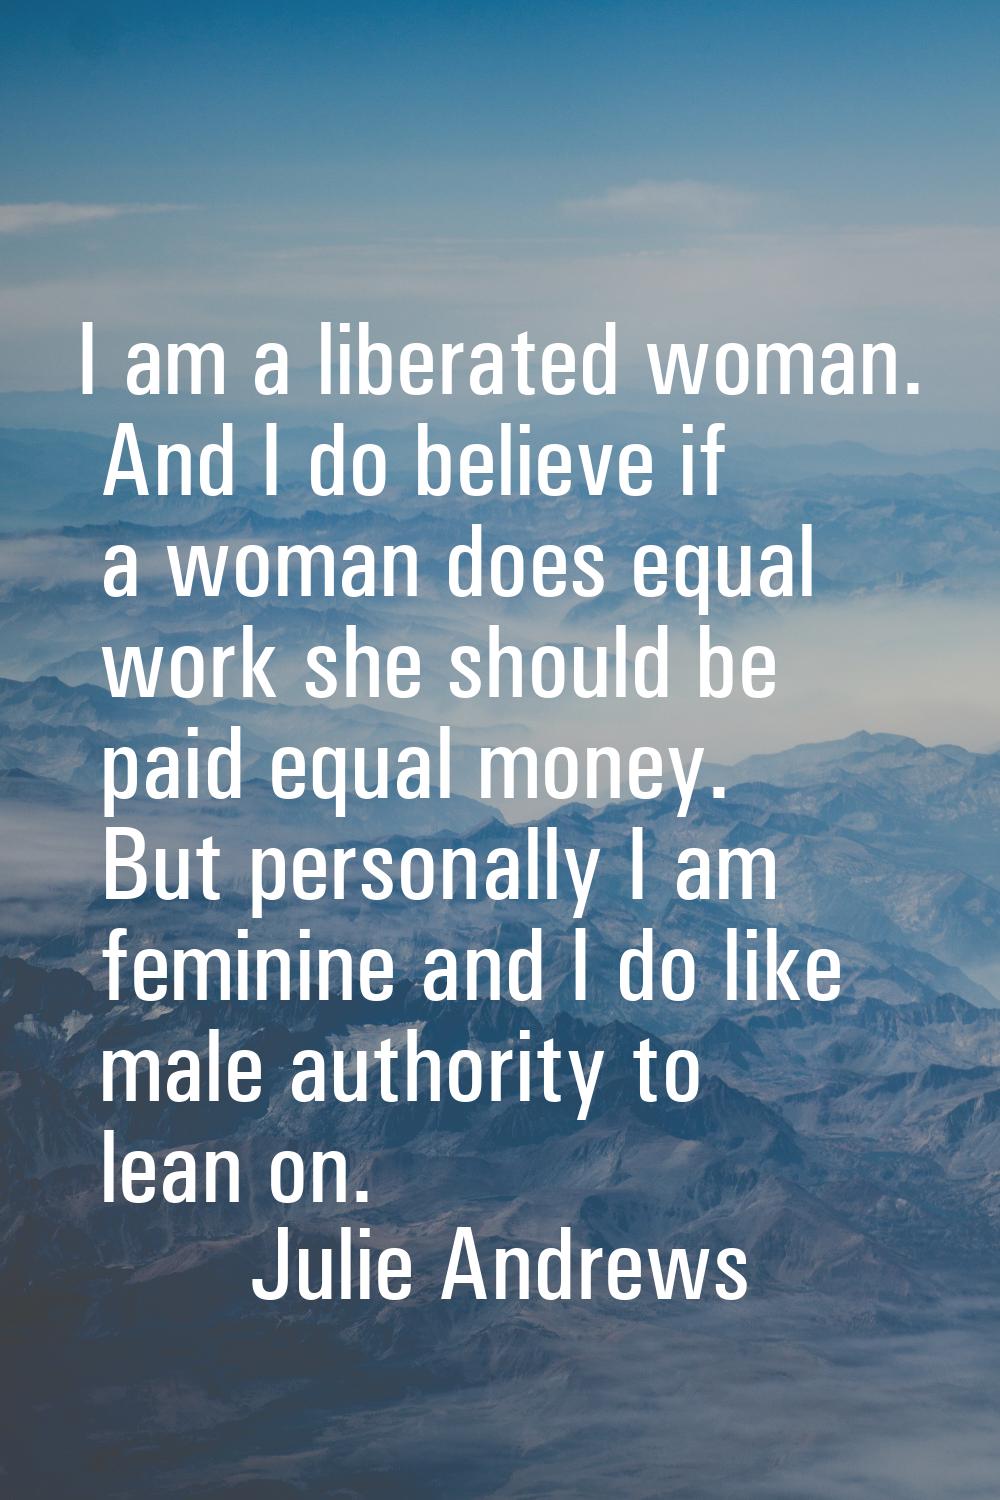 I am a liberated woman. And I do believe if a woman does equal work she should be paid equal money.